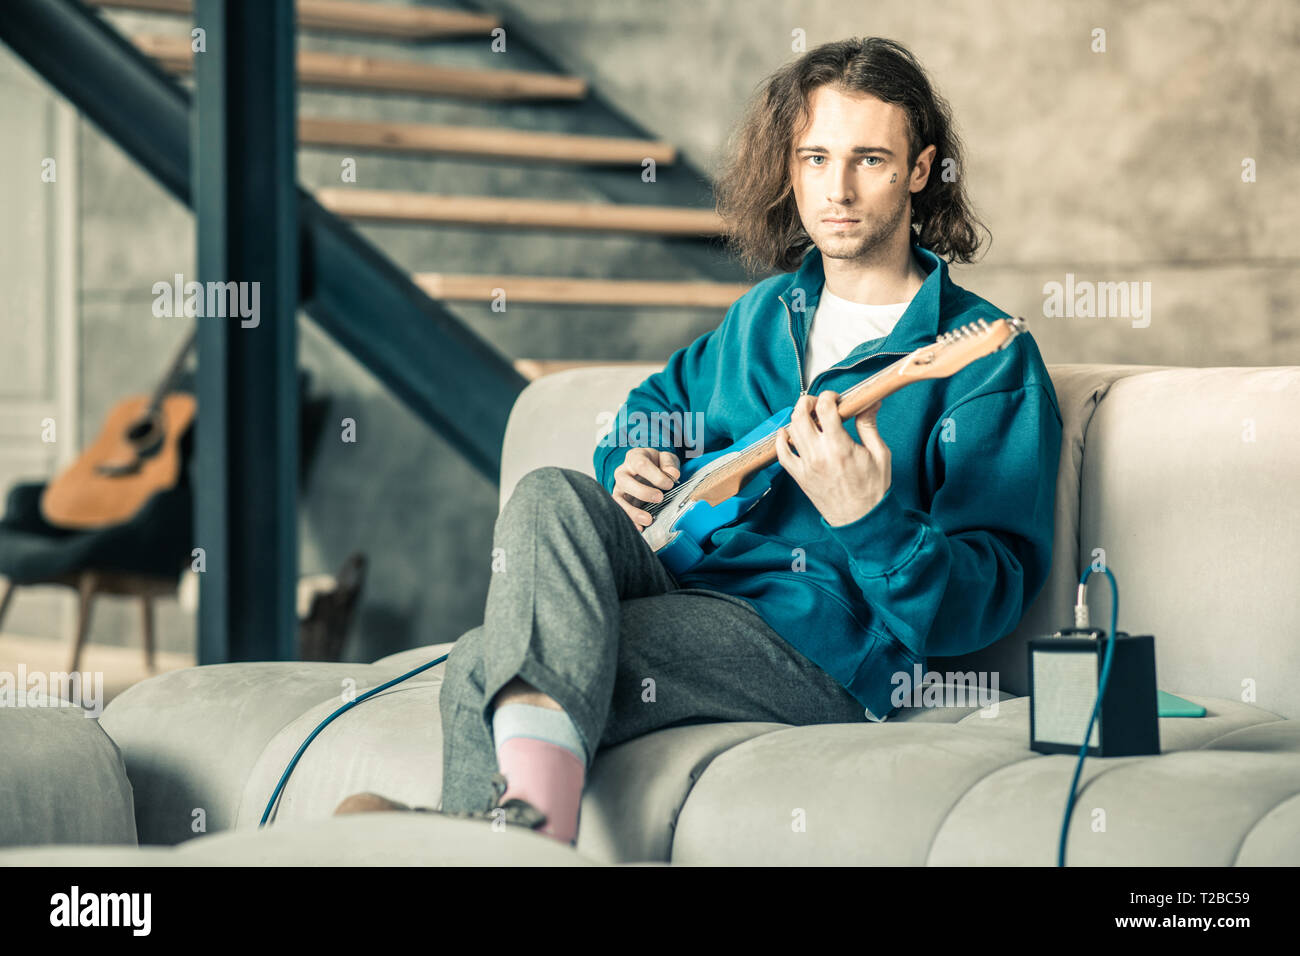 Handsome extraordinary man wearing stylish outfit while training his guitar skills Stock Photo